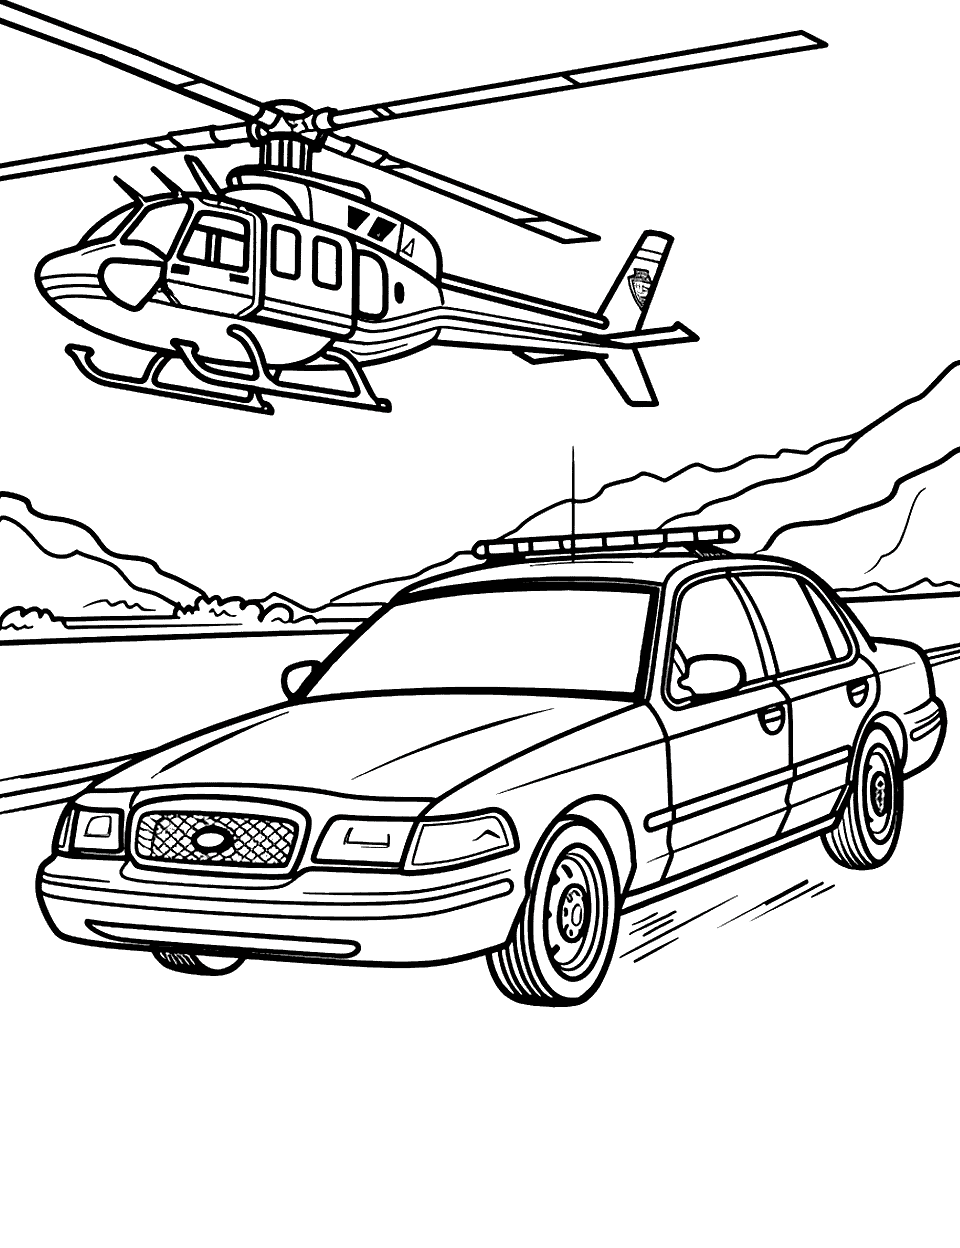 Police Helicopter in Flight Car Coloring Page - A police helicopter flying above a police car patrolling a coastal road.